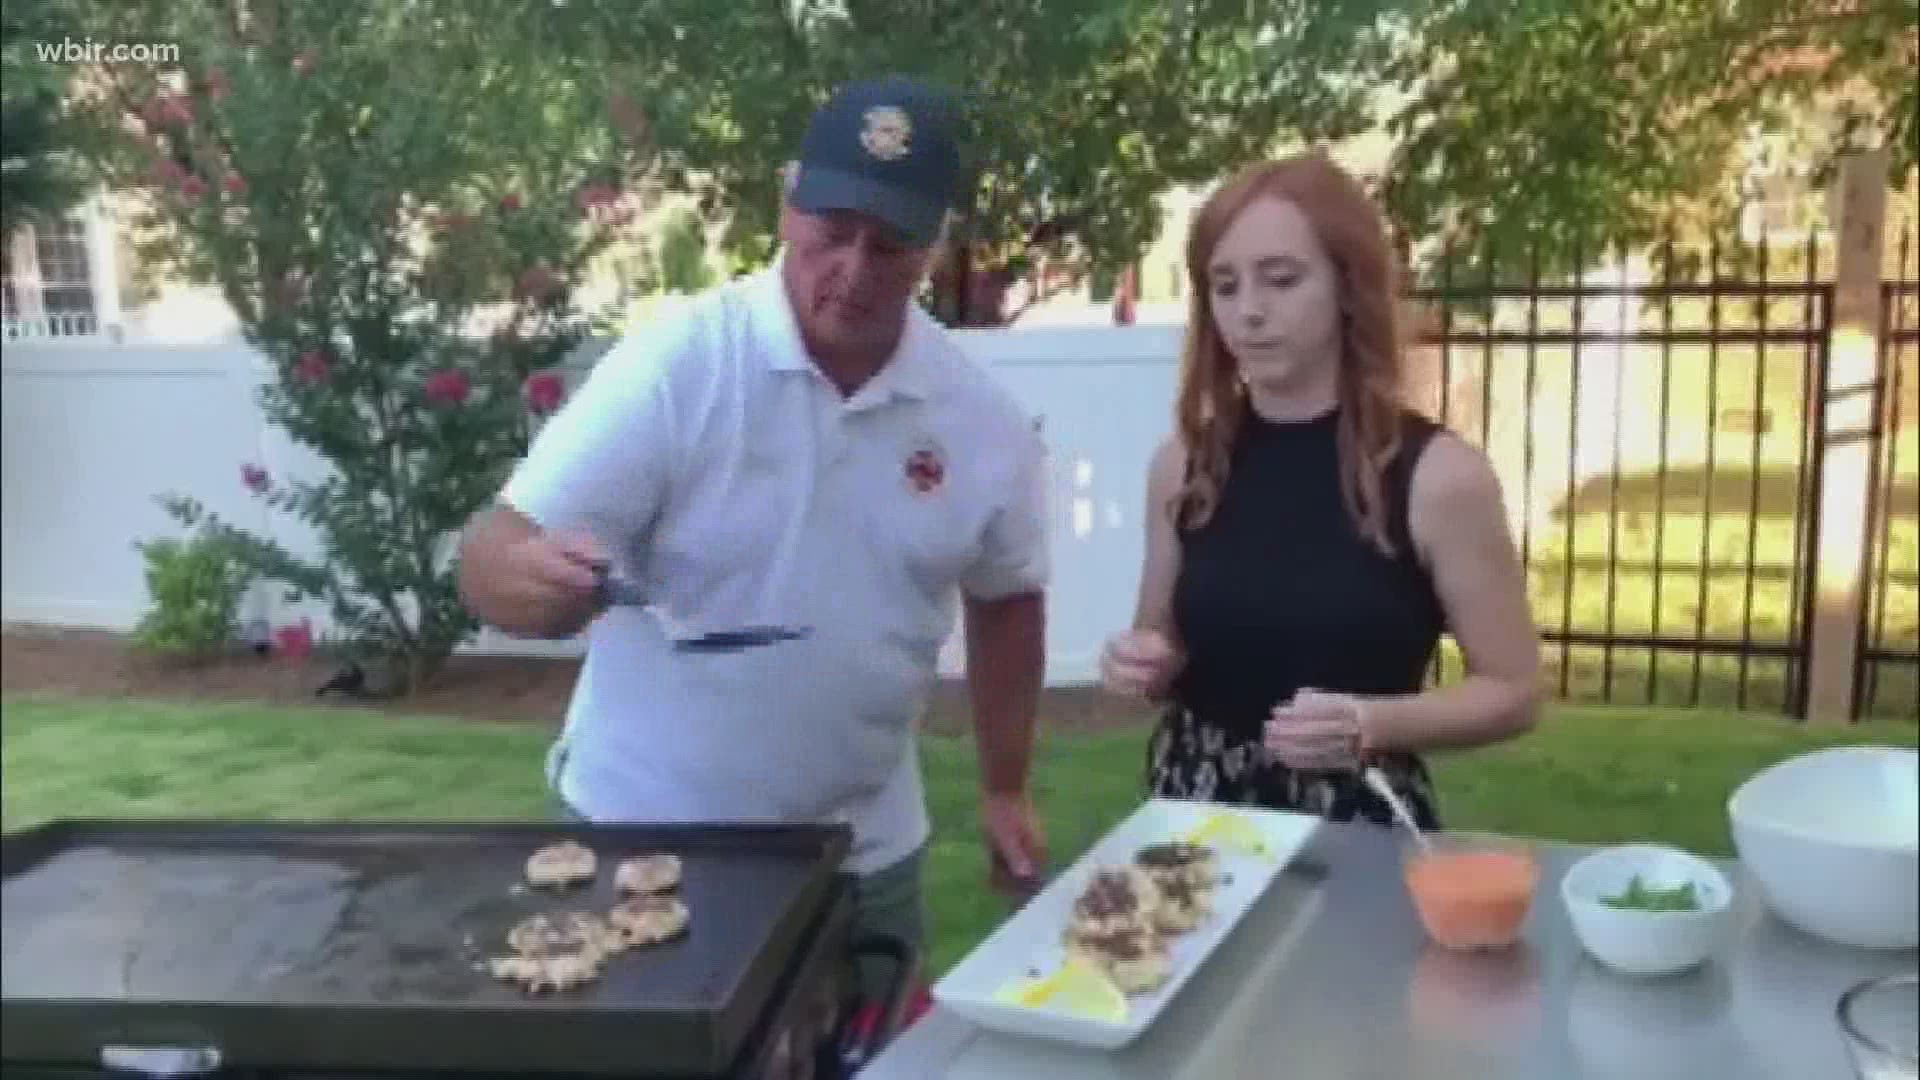 Capt. D.J. Corcoran with the Knoxville Fire Dept. enlists the help of his daughter to make crab cakes. July 20, 2020-4pm.